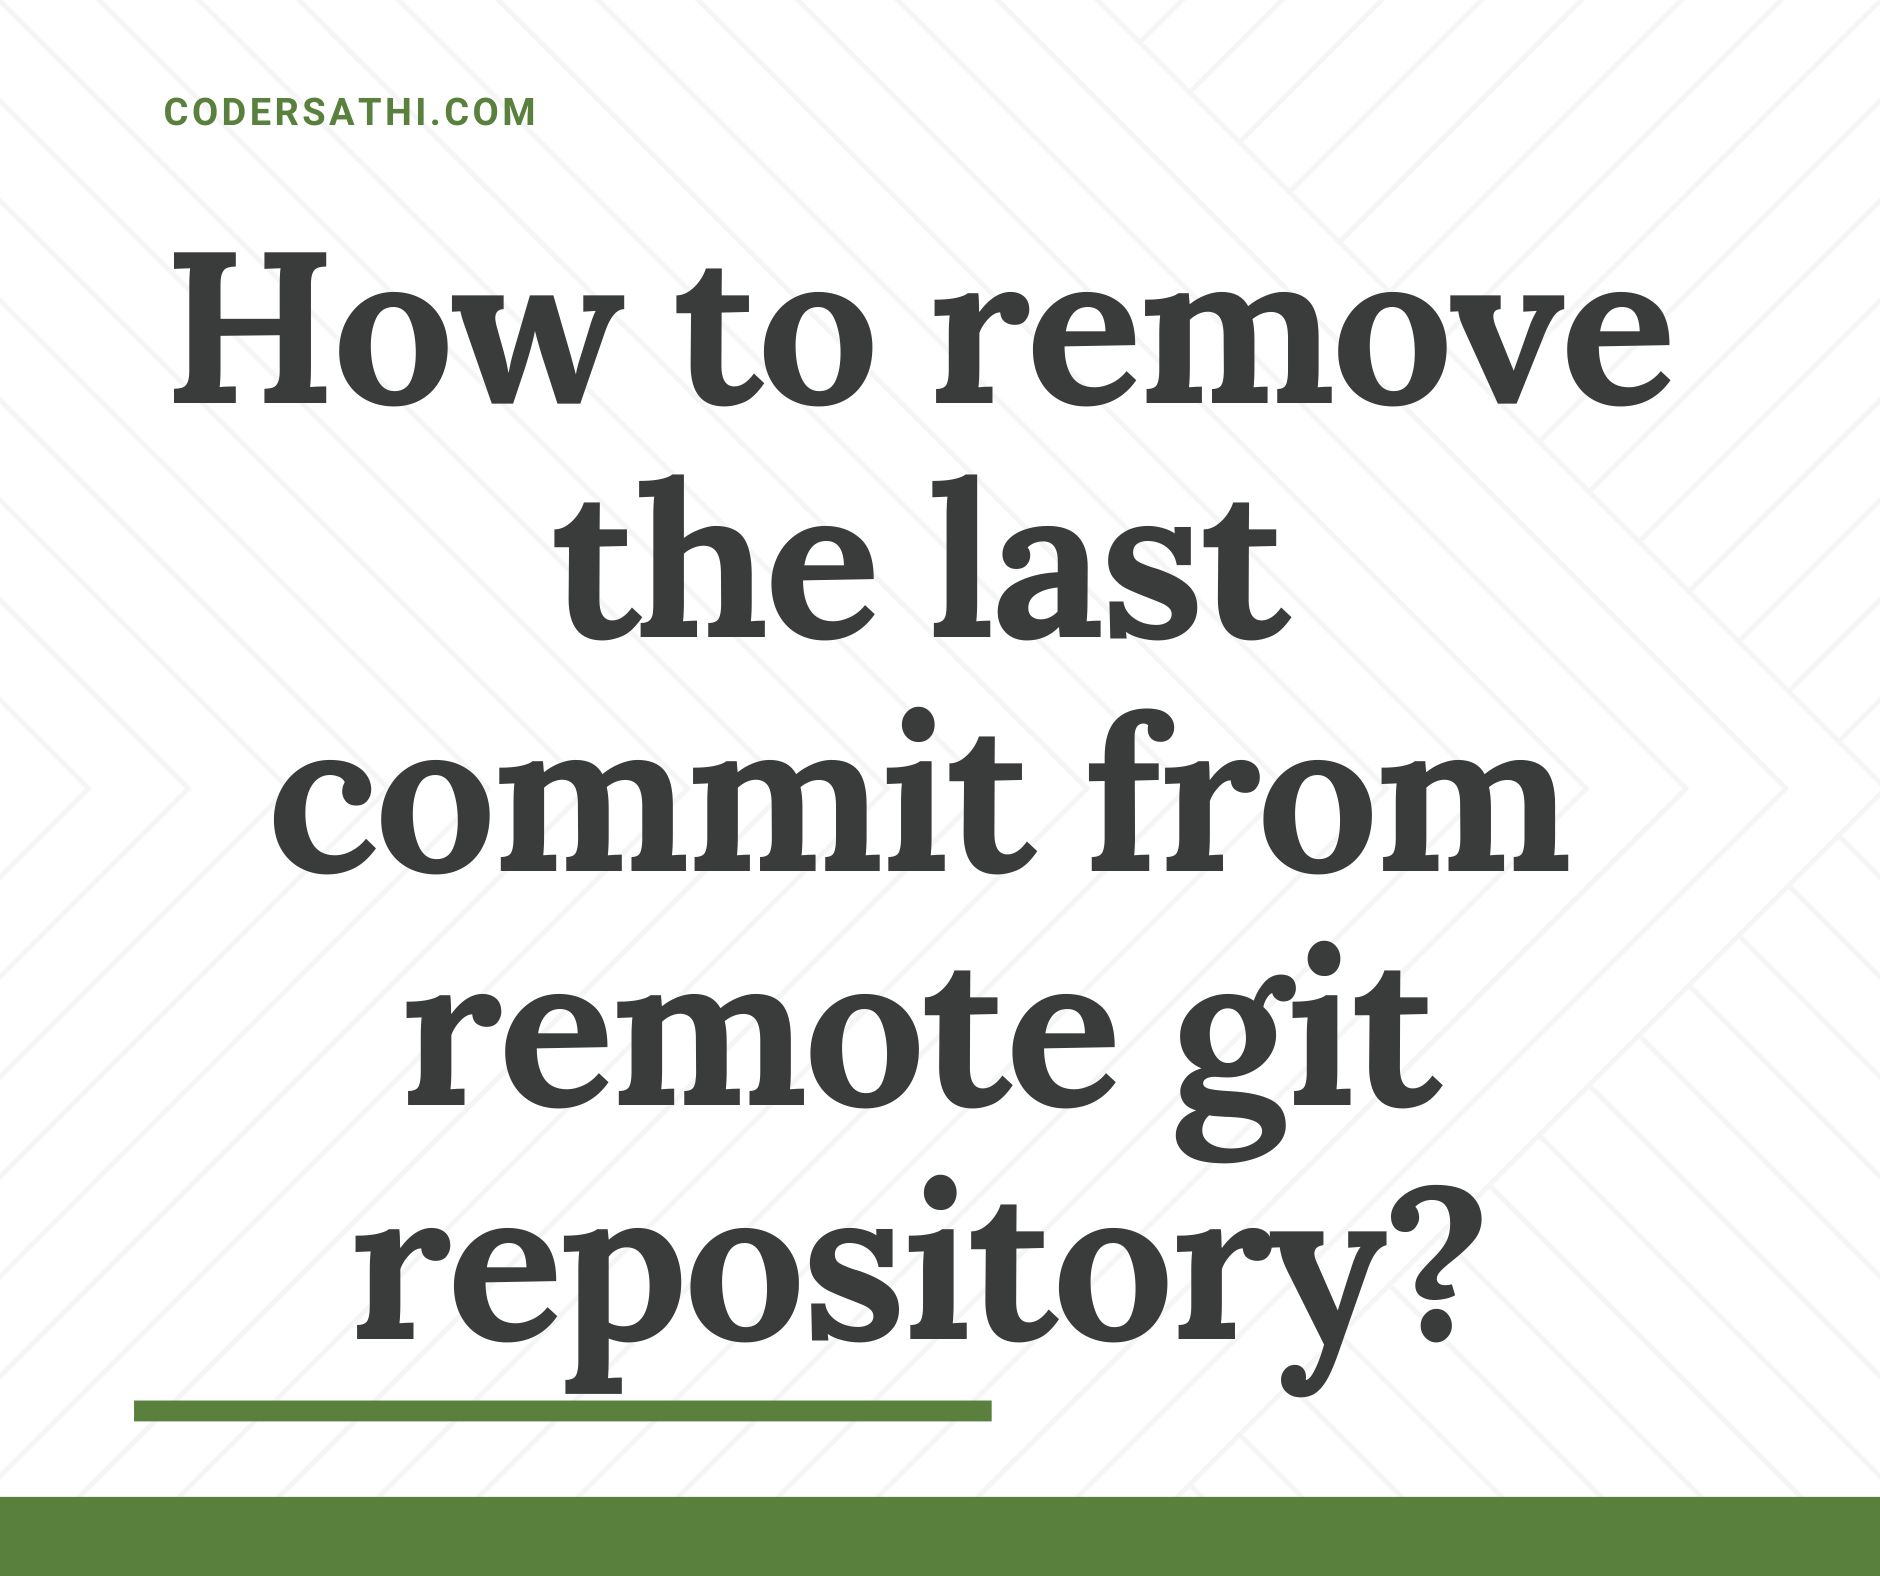 How to remove the last commit from remote git repository